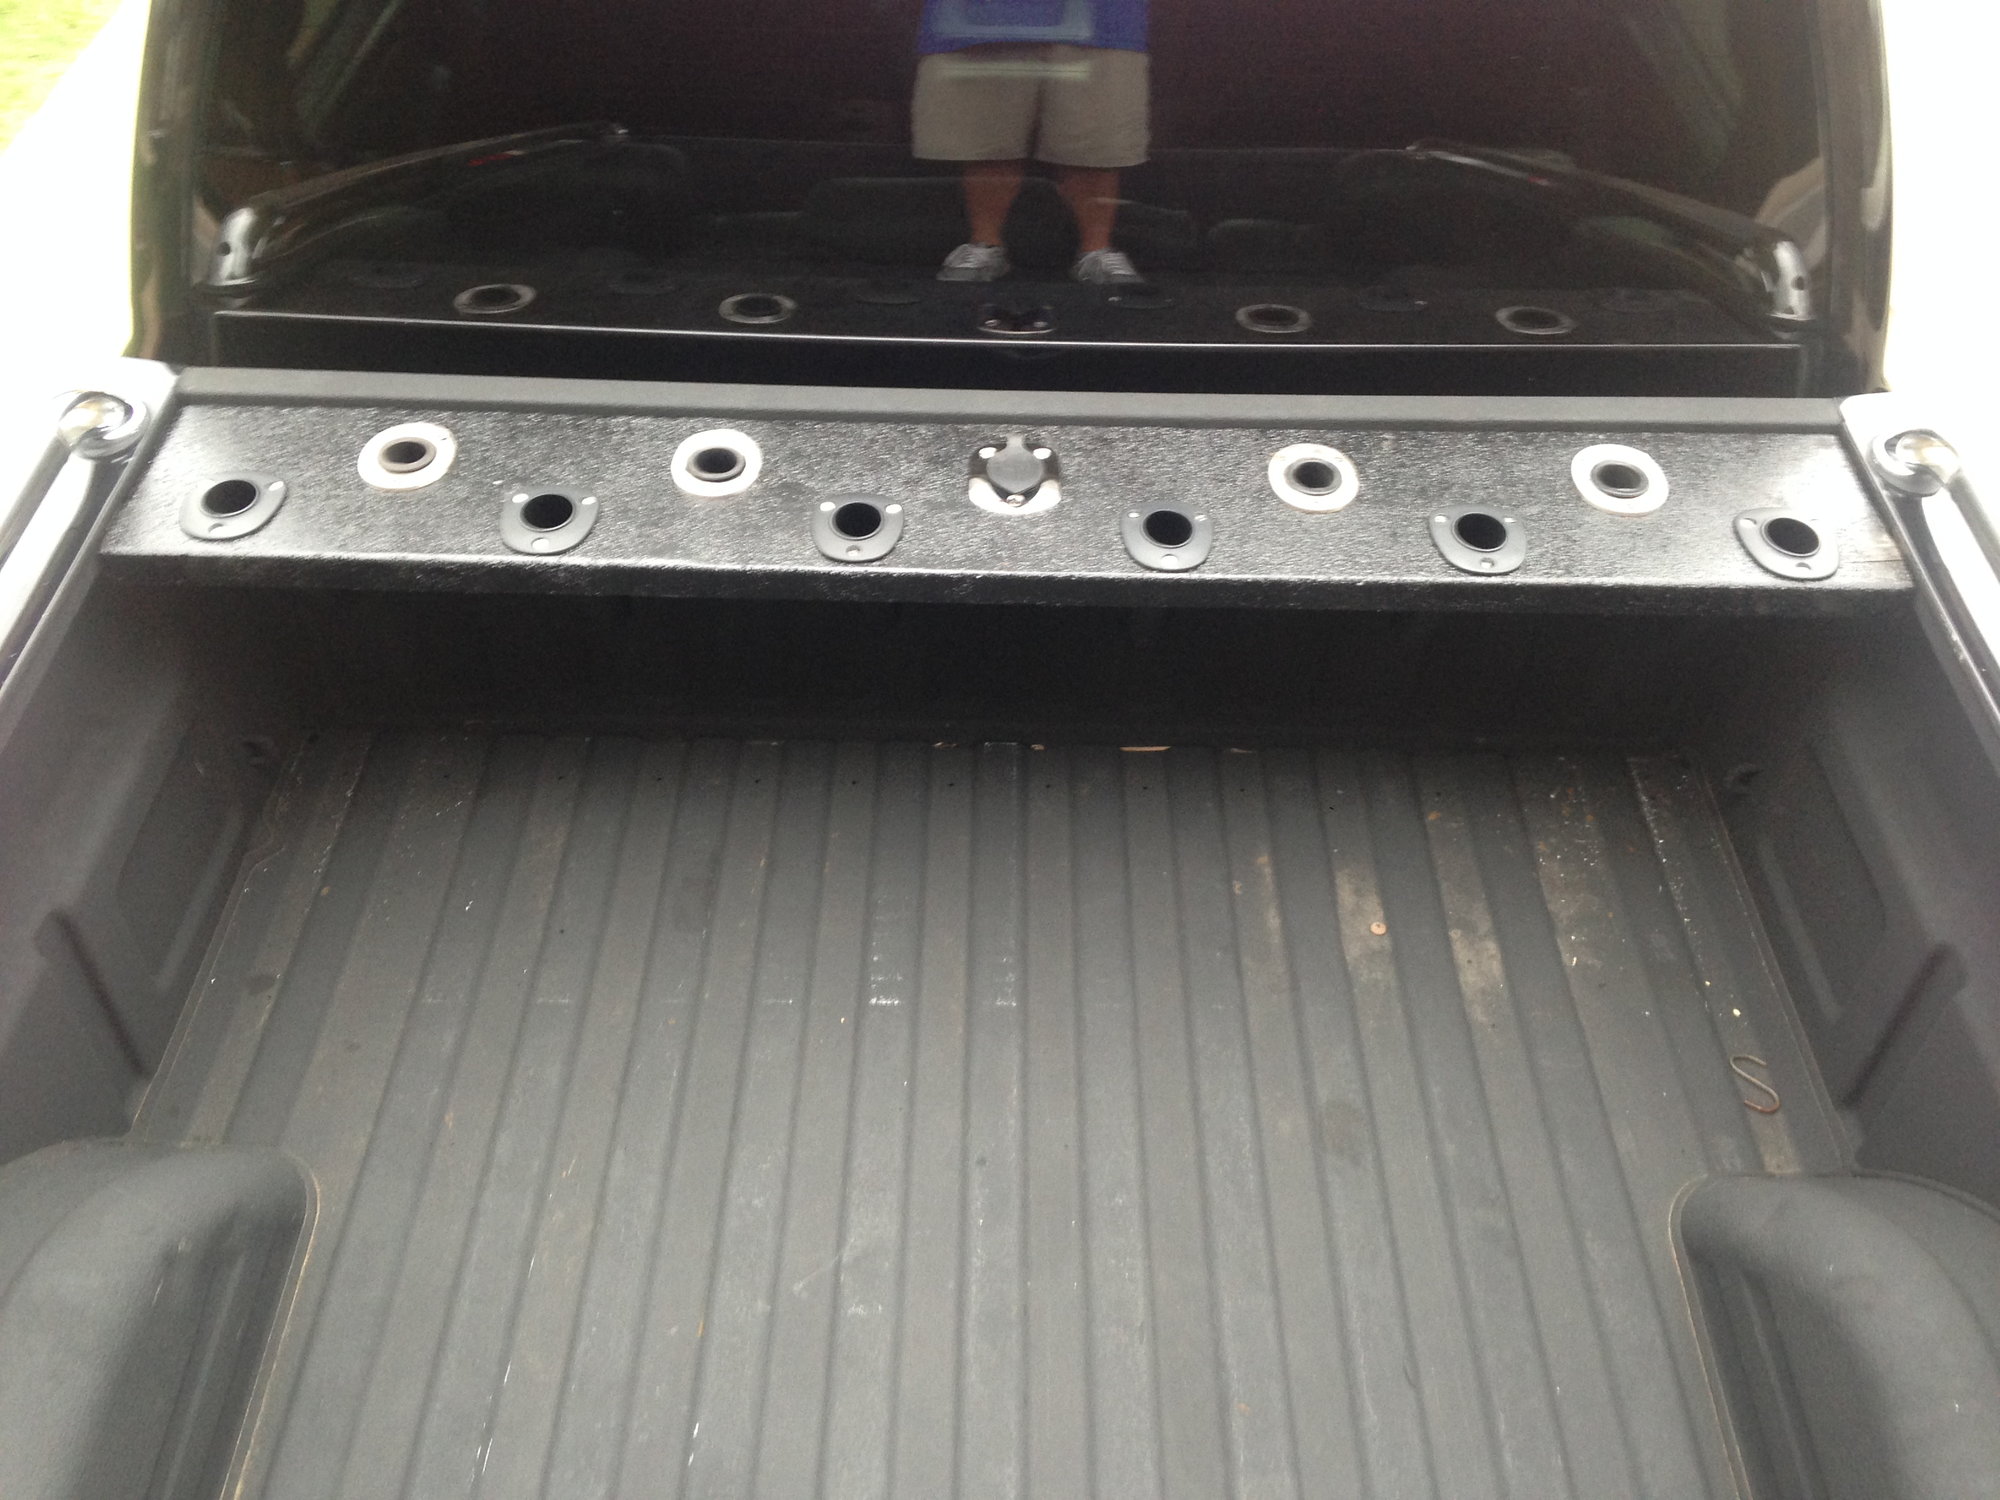 DIY: Custom Truck Bed Rod Holder - Page 3 - The Hull Truth